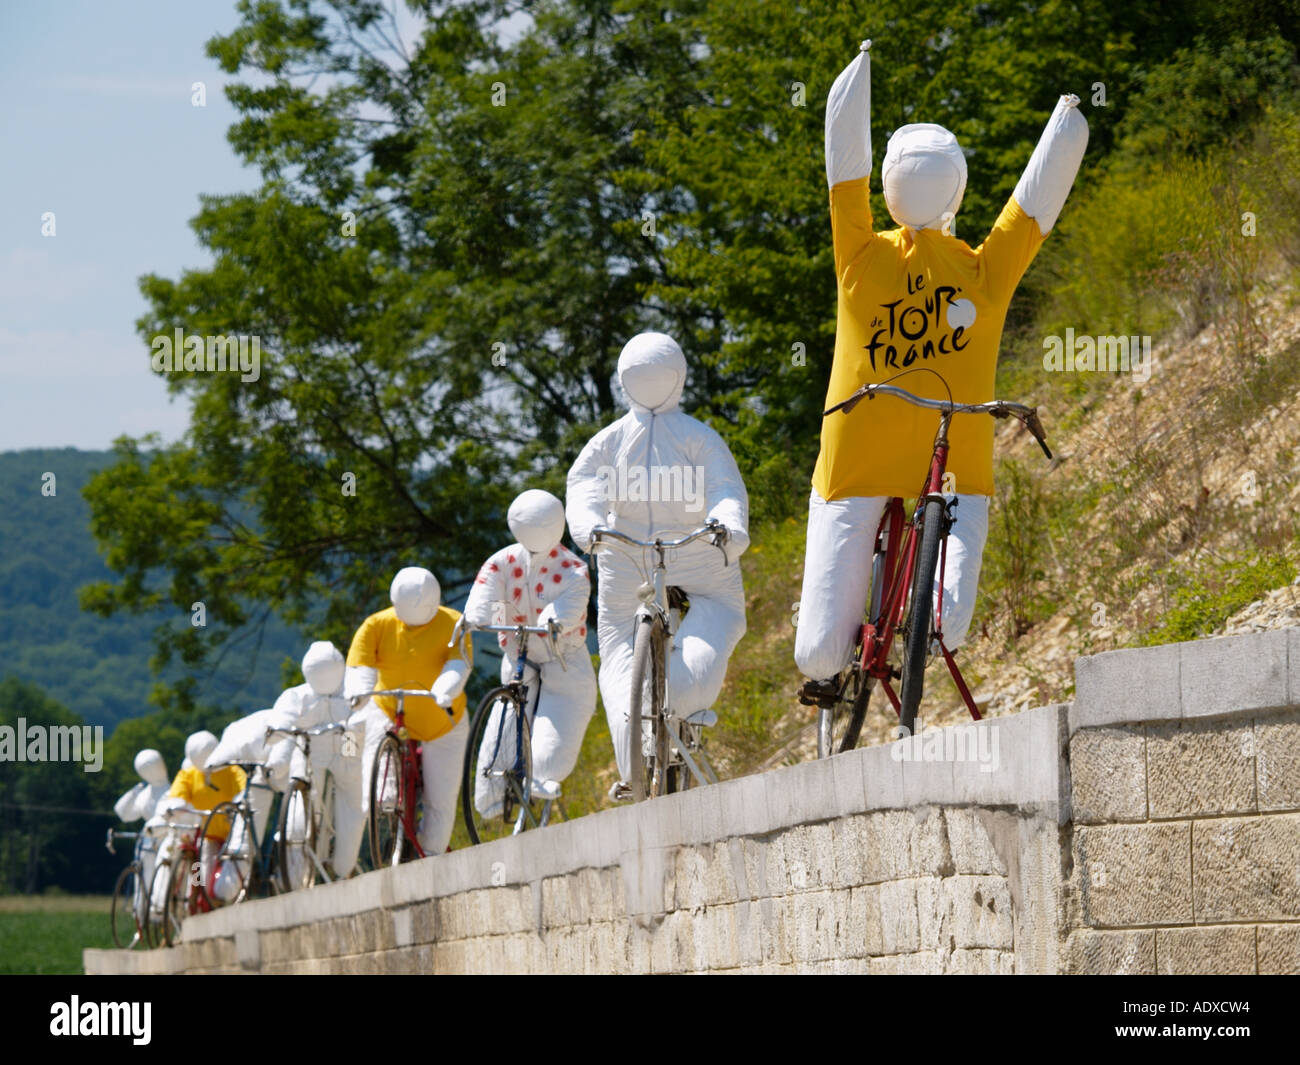 Roadside peloton of cycling dummies celebrating the passing of the Tour de France 7th stage 2005 season Suzannecourt France Stock Photo